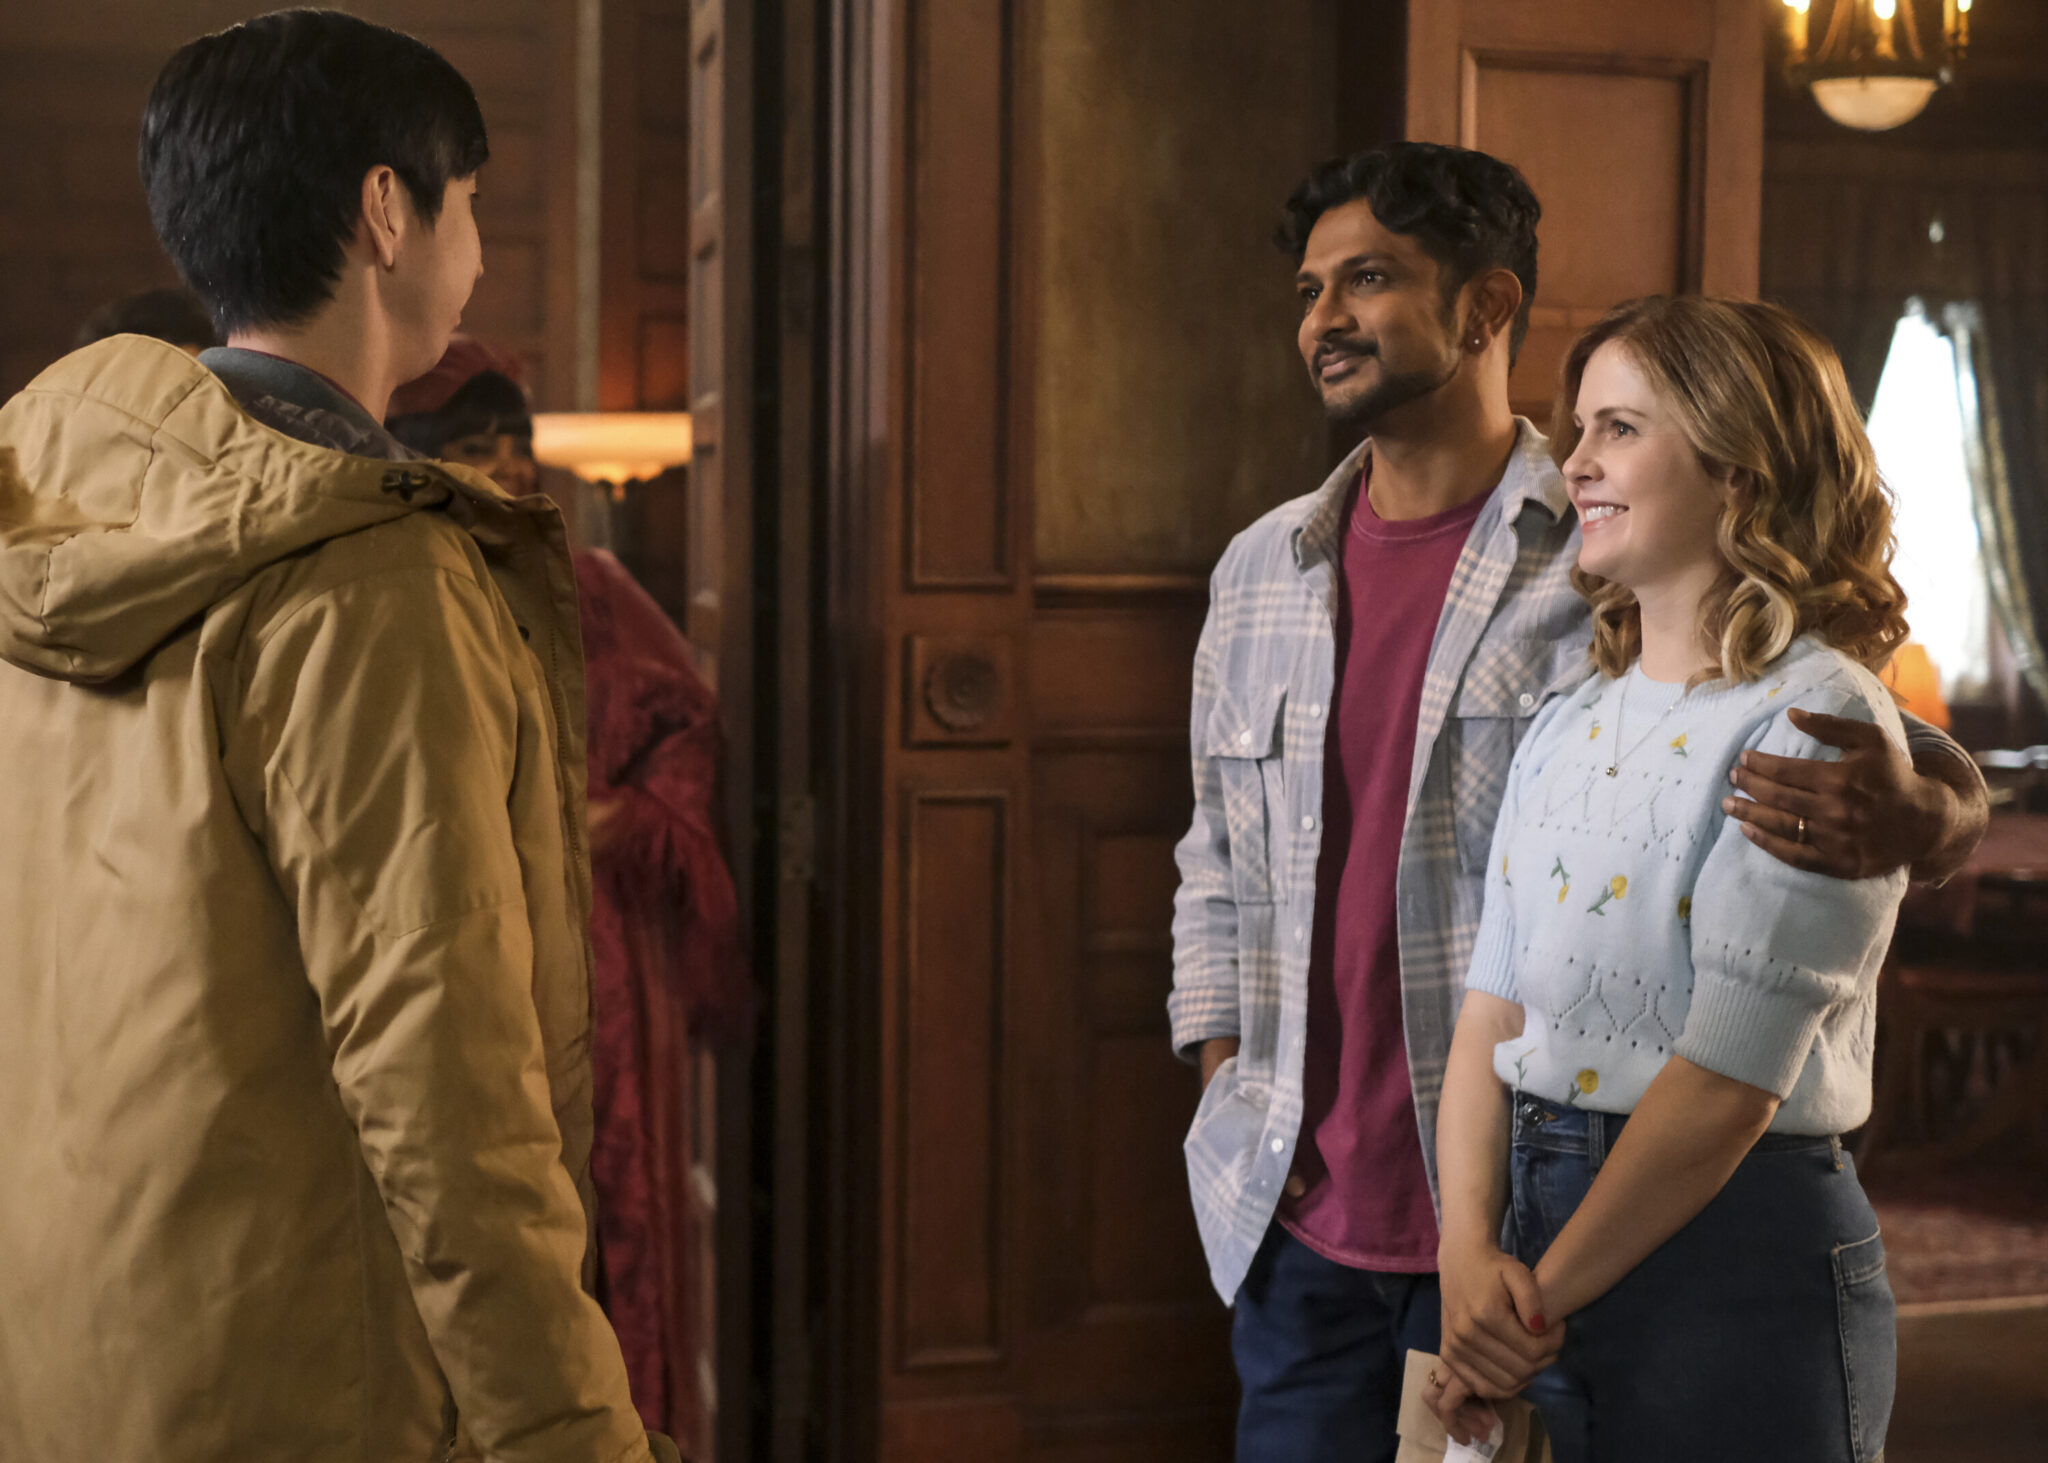 “The Perfect Assistant” – Sam and Jay are thrilled when they find a highly qualified assistant for the B&B – however, their new employee comes with some surprising baggage. Also, Thorfinn tries to help his son, Bjorn, deal with a bully, on the CBS Original series GHOSTS, Thursday, Jan. 5 (8:31-9:01 PM, ET/PT) on the CBS Television Network, and available to stream live and on demand on Paramount+. Pictured (L-R): Utkarsh Ambudkar as Jay and Rose McIver as Samantha. Photo: Bertrand Calmeau/CBS ©2022 CBS Broadcasting, Inc. All Rights Reserved.